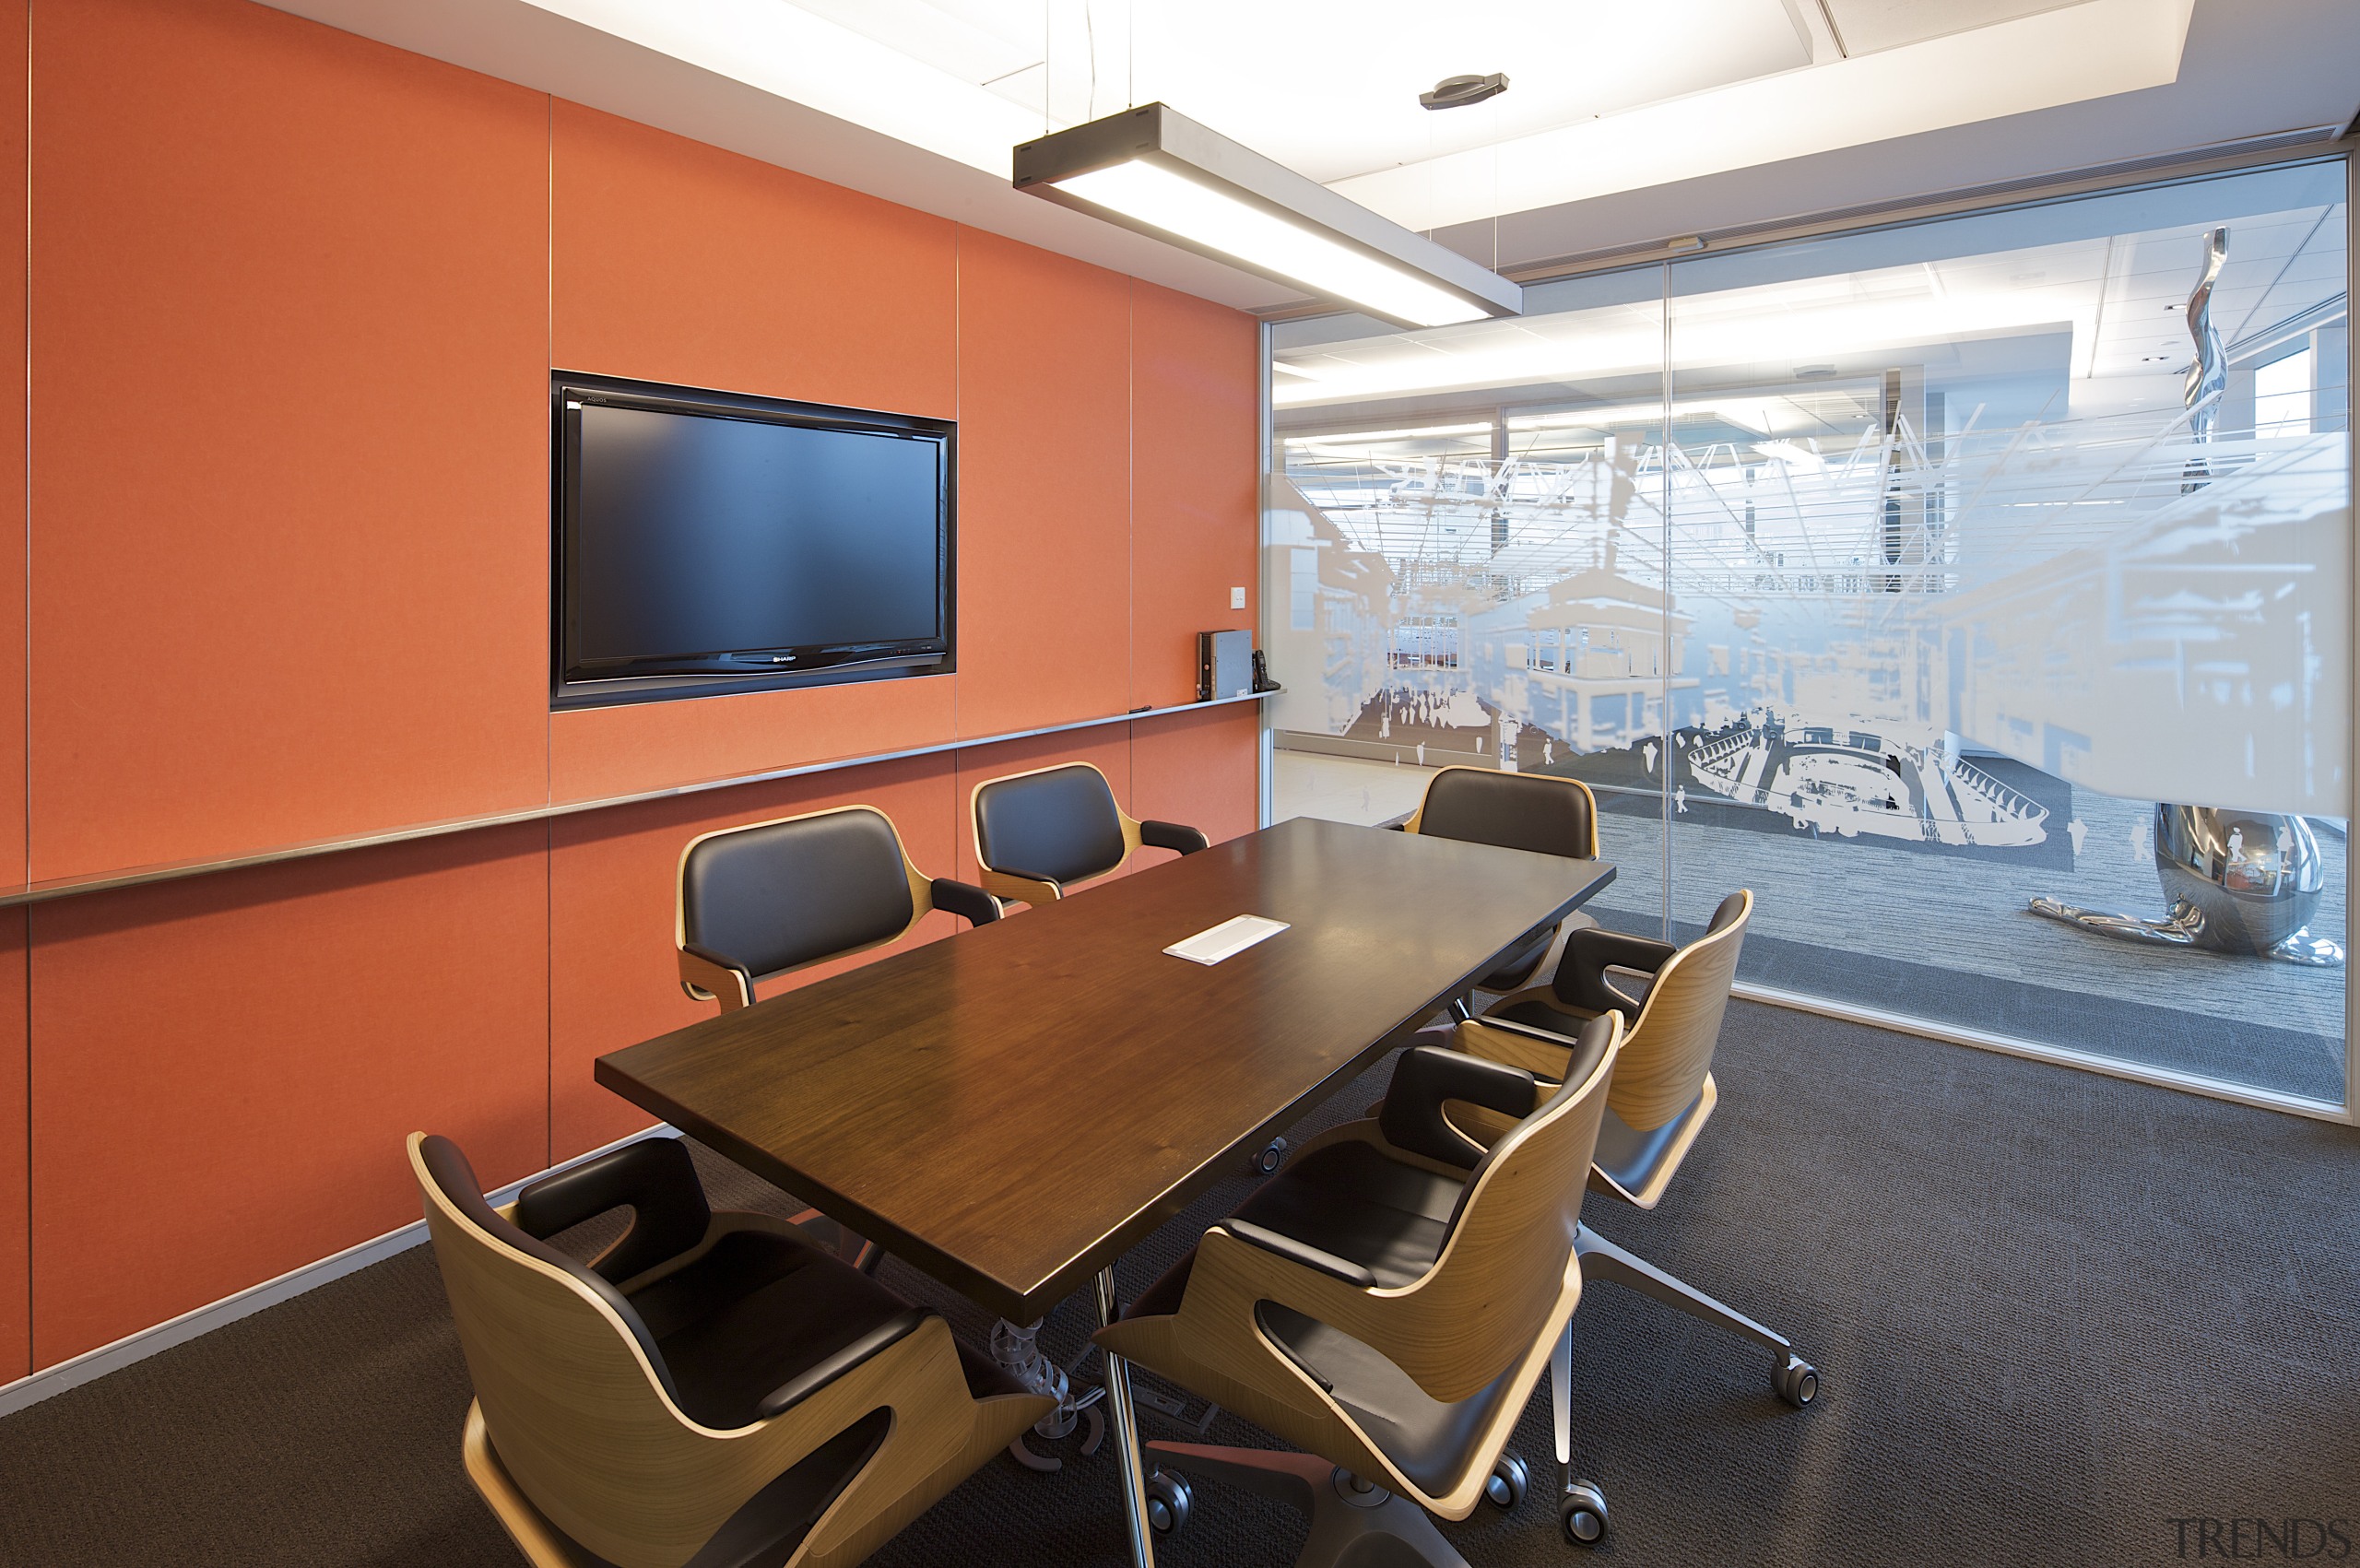 Interior view of a meeting room which features conference hall, furniture, interior design, office, table, red